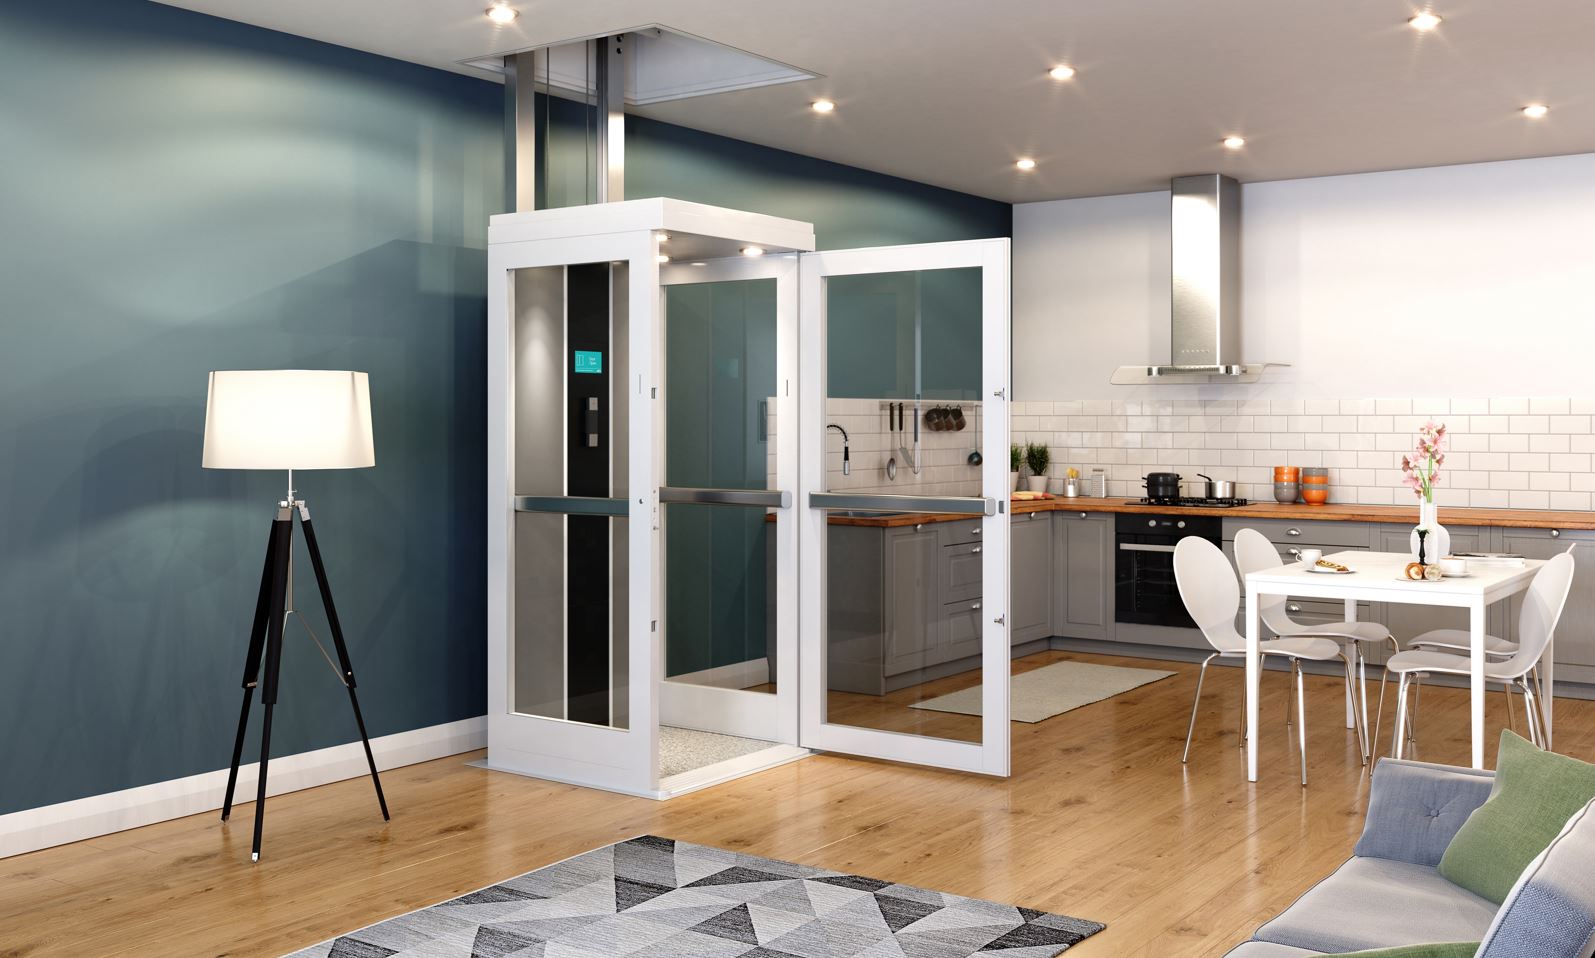 Home Elevator Price Guide: Things to Keep in Mind